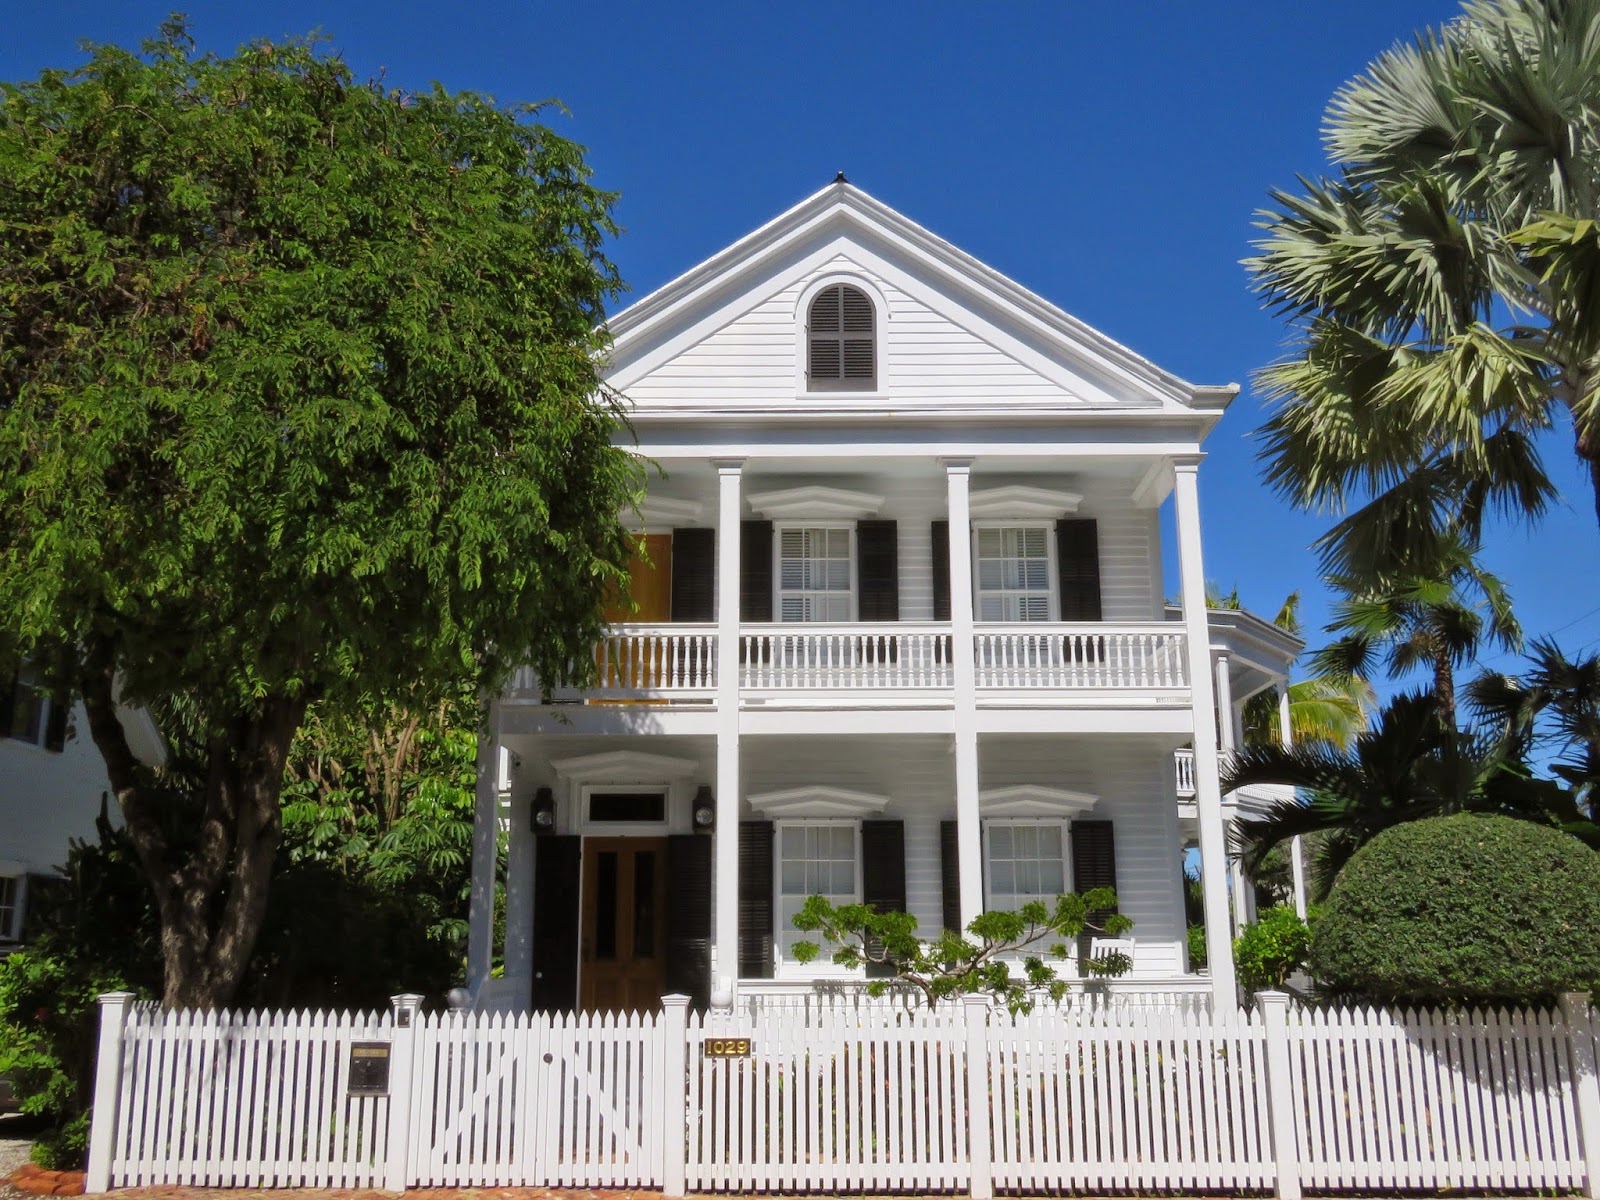 Key West vacation and visit guide: Most beautiful Key West houses ...